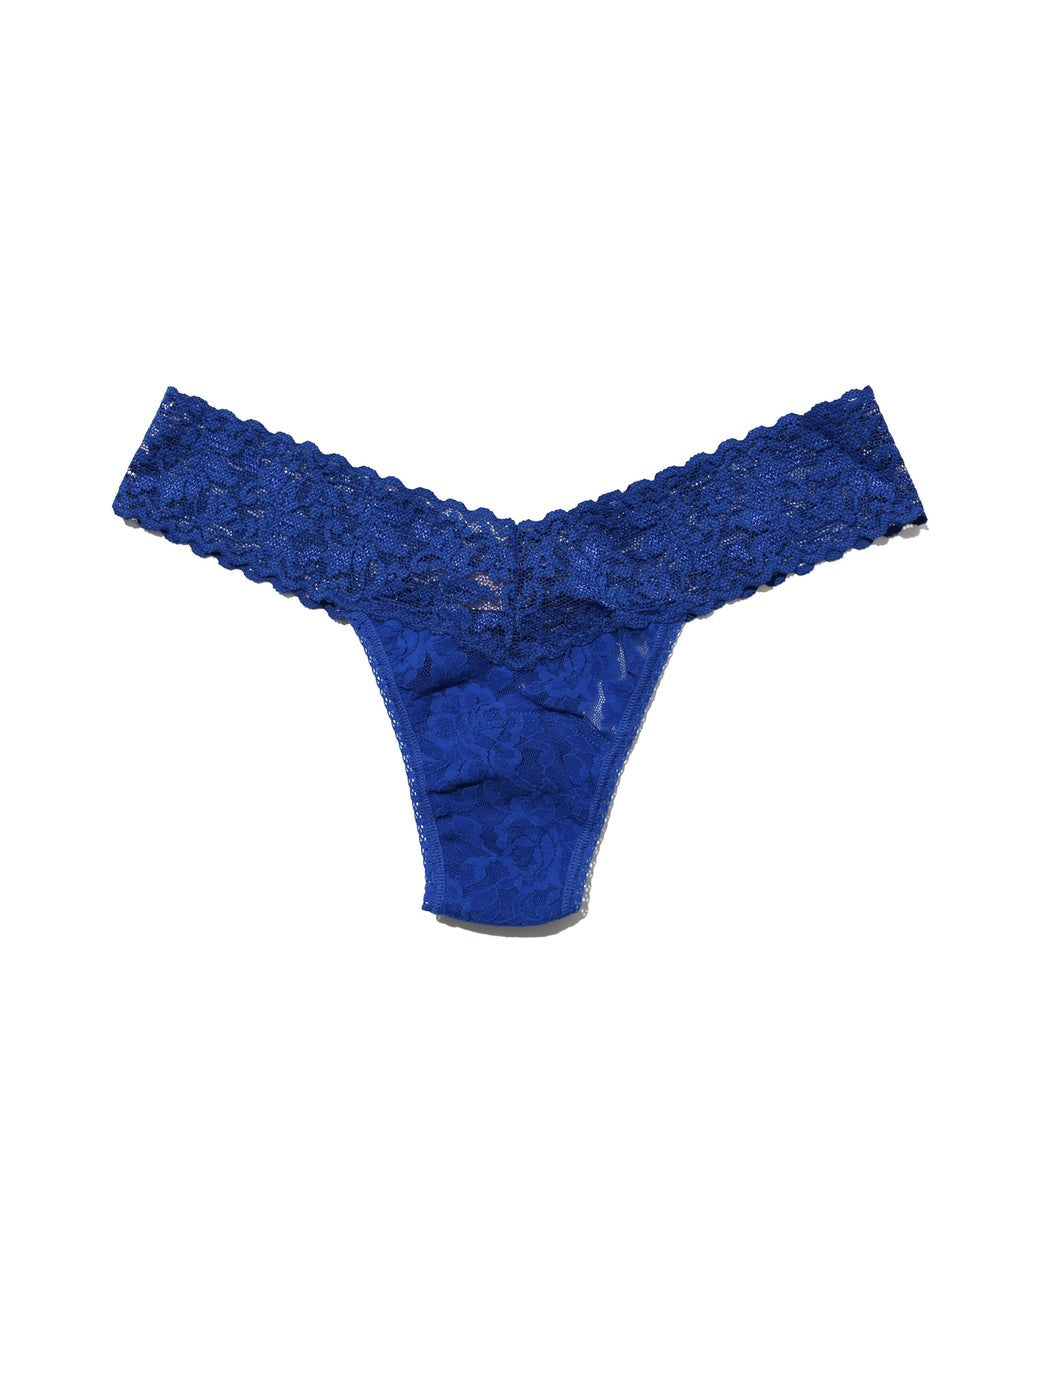 Wholesale Blue Rose Underwear Cotton, Lace, Seamless, Shaping